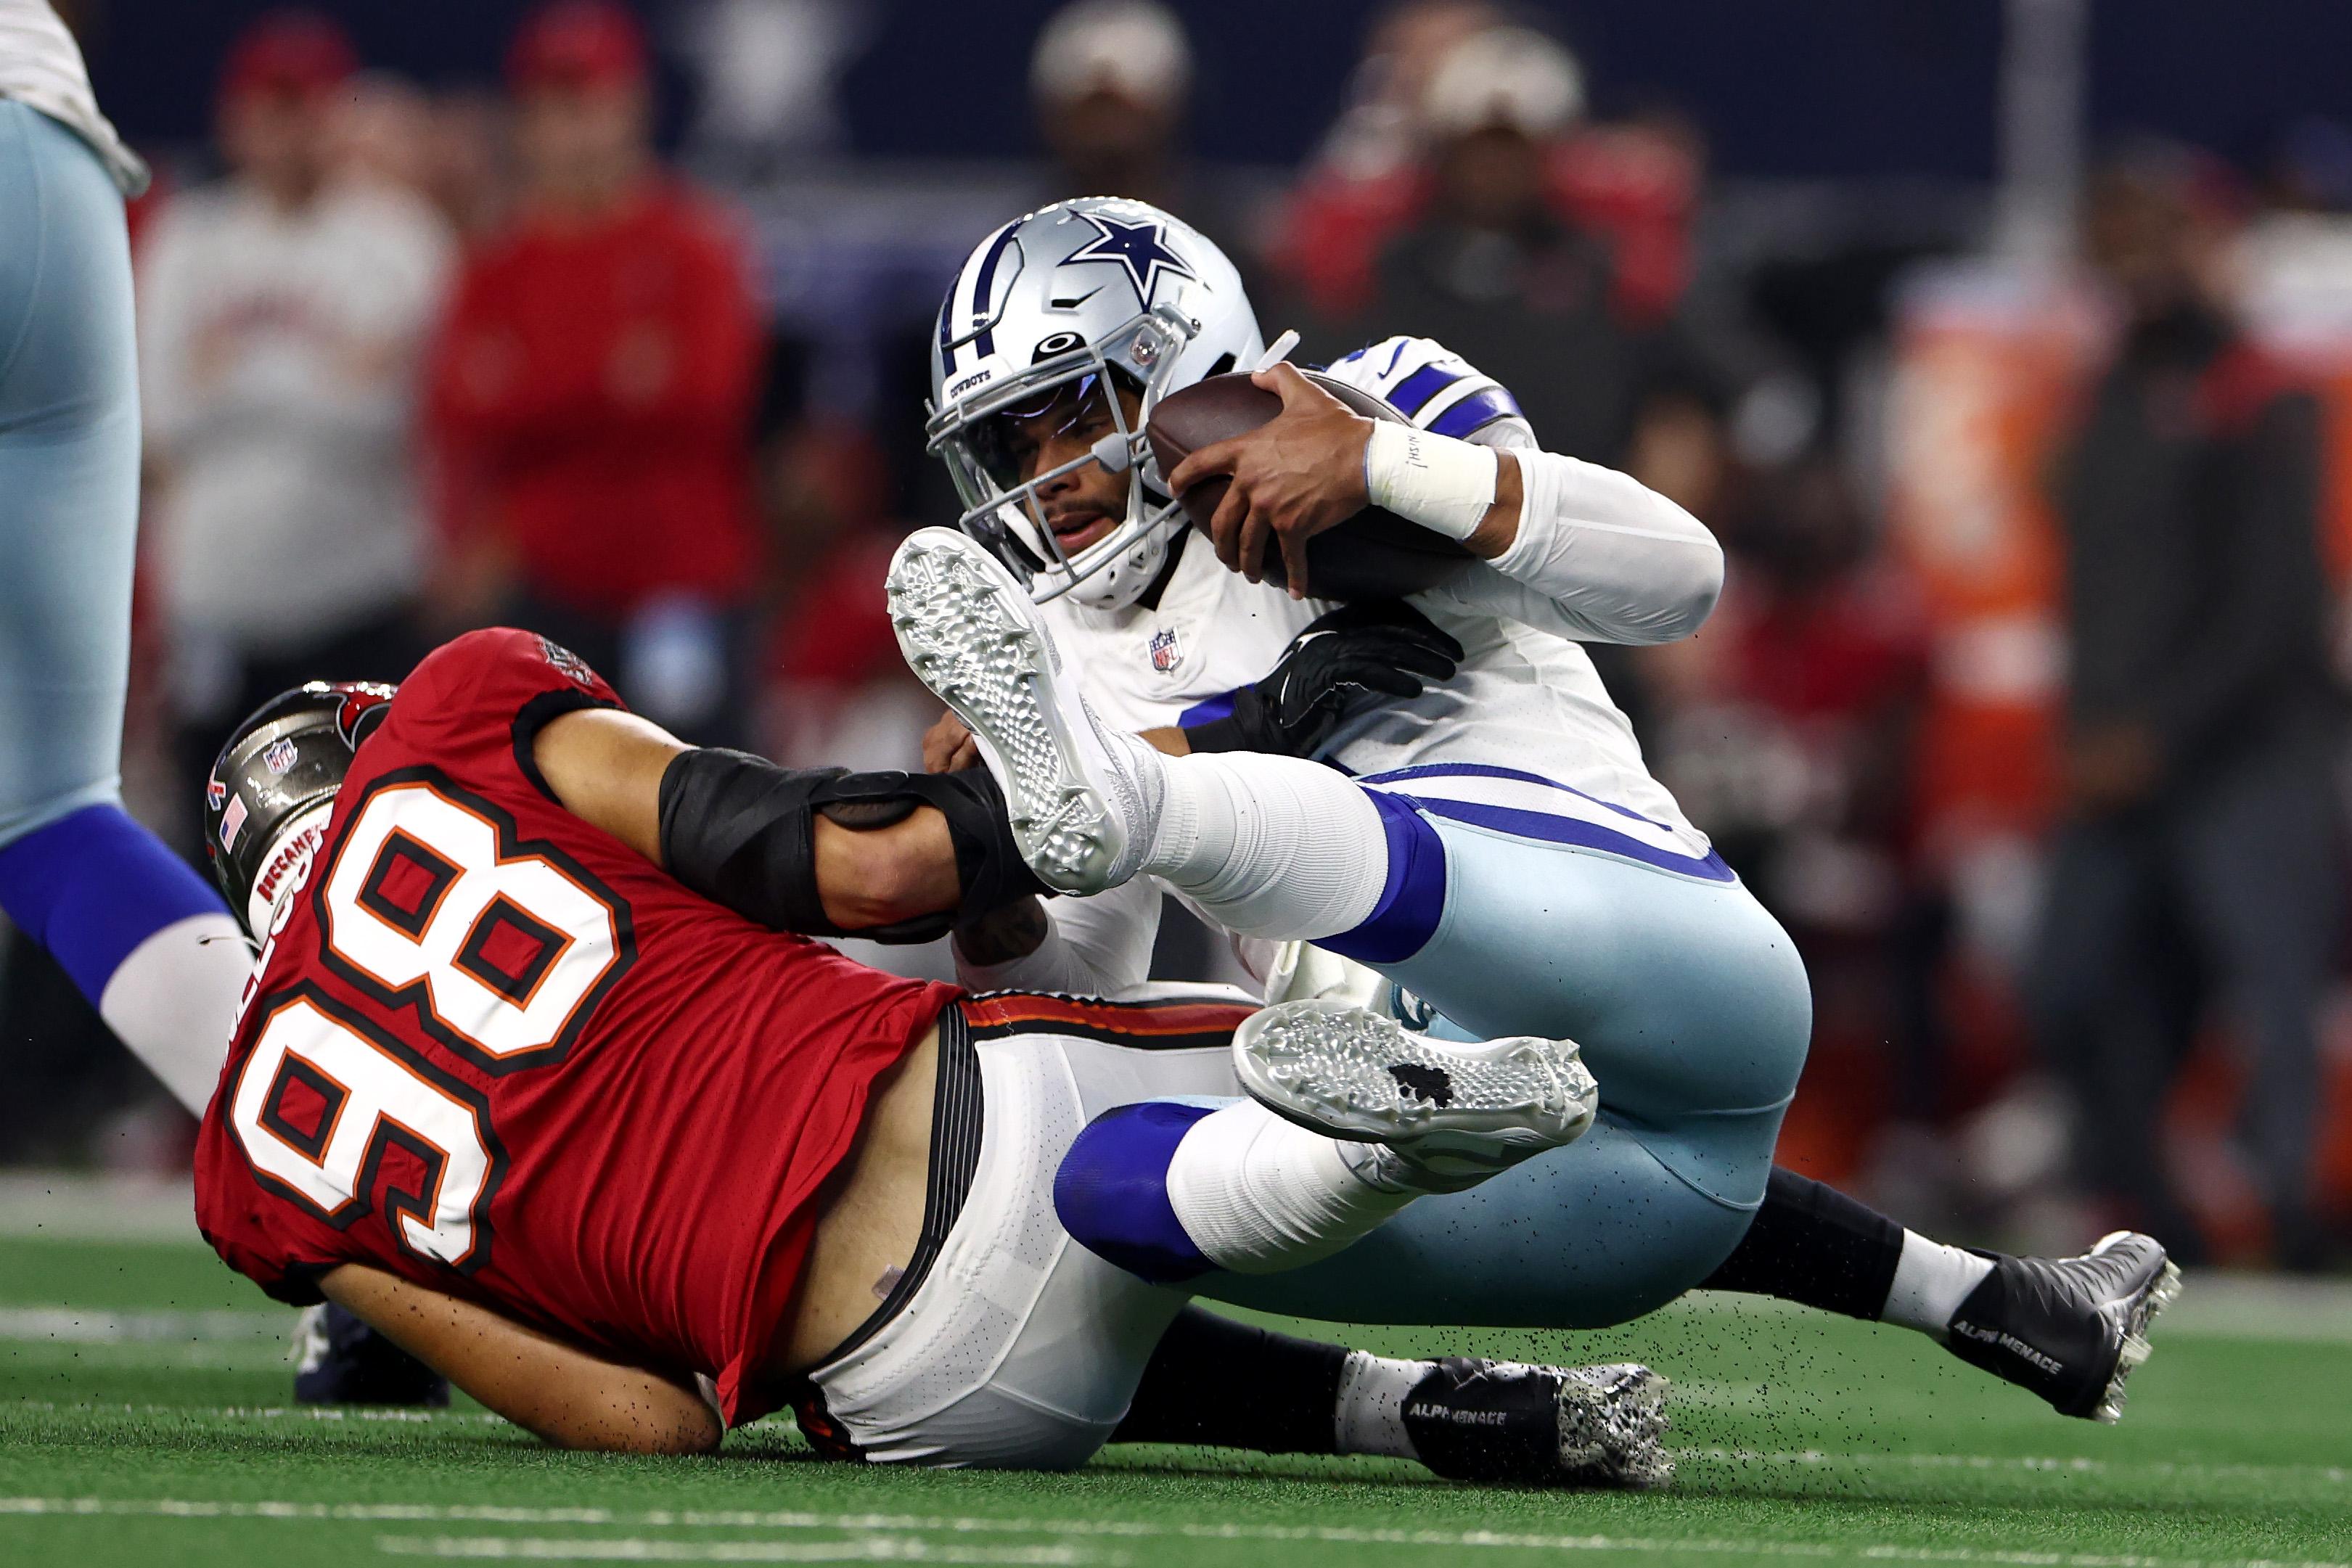 Dak grips the football and grimaces as he gets pulled to the ground by a giant Buccaneer